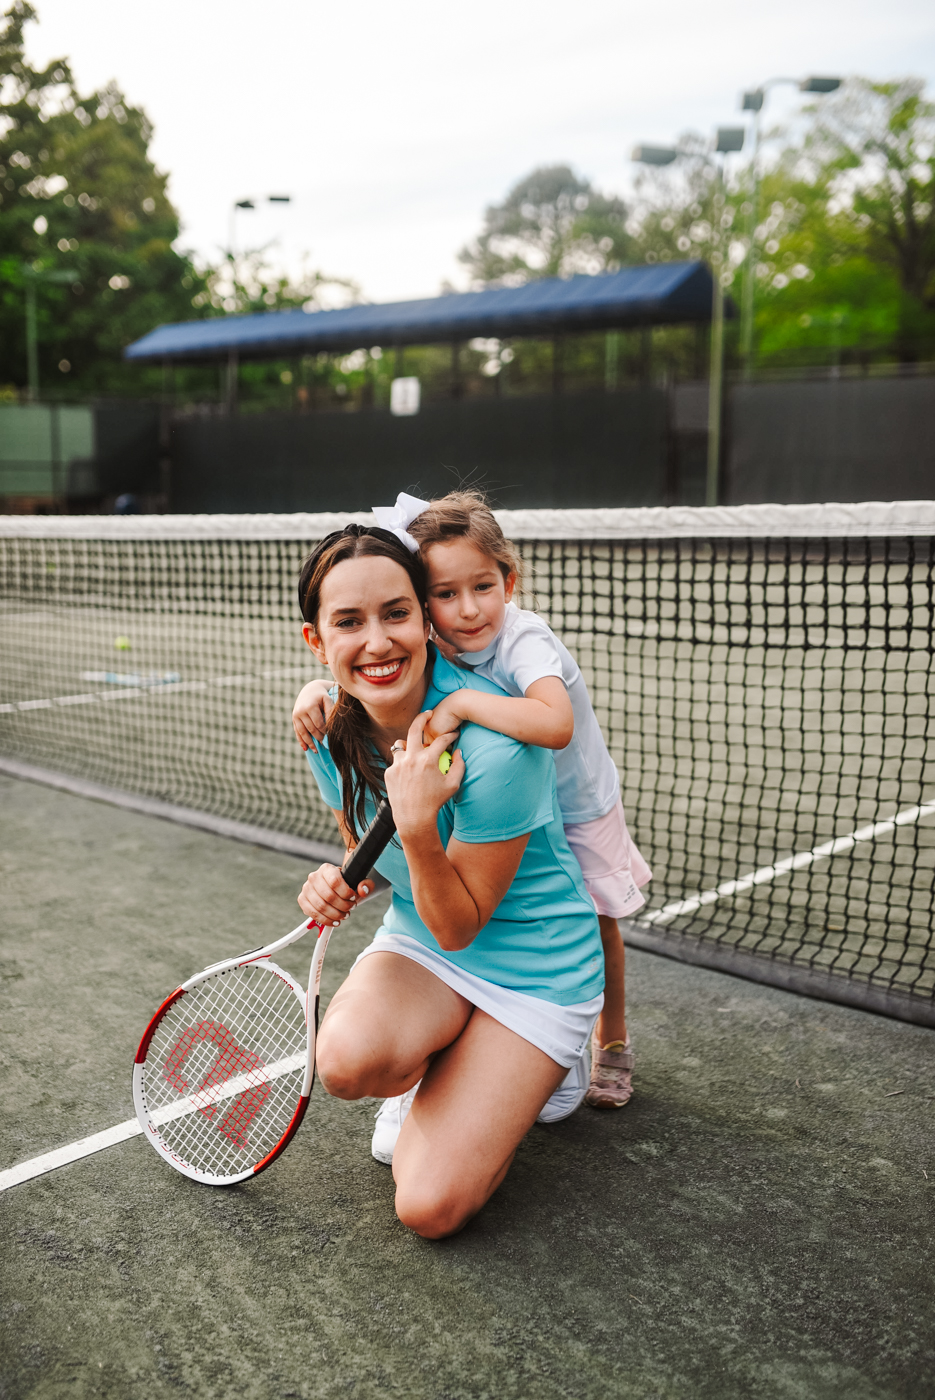 Tennis Outfits by popular Memphis fashion blog, Lone Star Looking Glass: image of a mom kneeling on a tennis court and holding a tennis racket and tennis ball while her young daughter hugs her from behind and they're both wearing tennis outfits. 